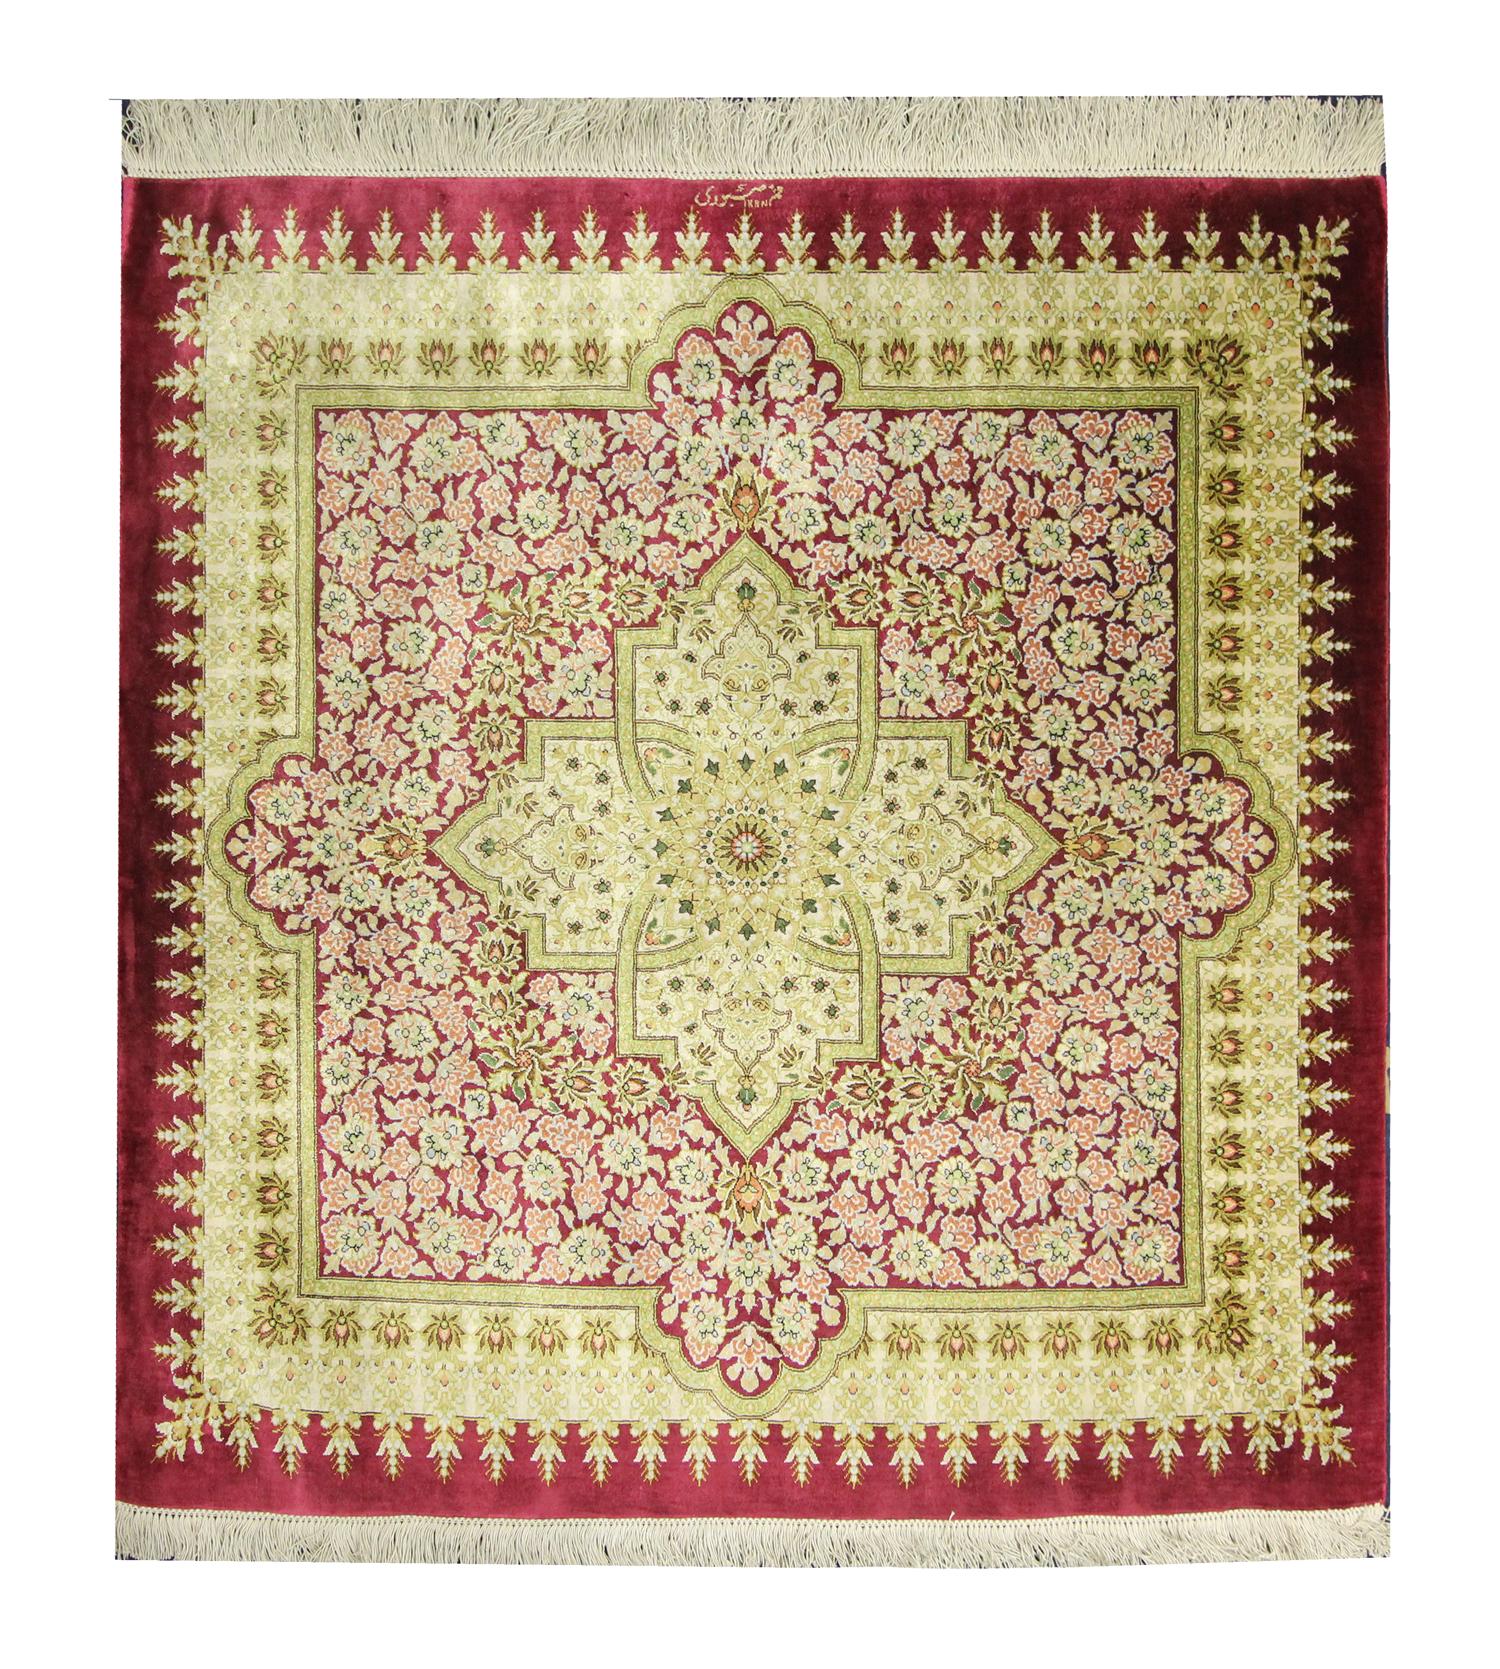 This luxurious square rug was woven by hand in Azerbaijan and features a large medallion design. Featuring highly-decorative floral pattern, an elegant medallion design and layered repeat border with beige, pink and cream accents on a rich red